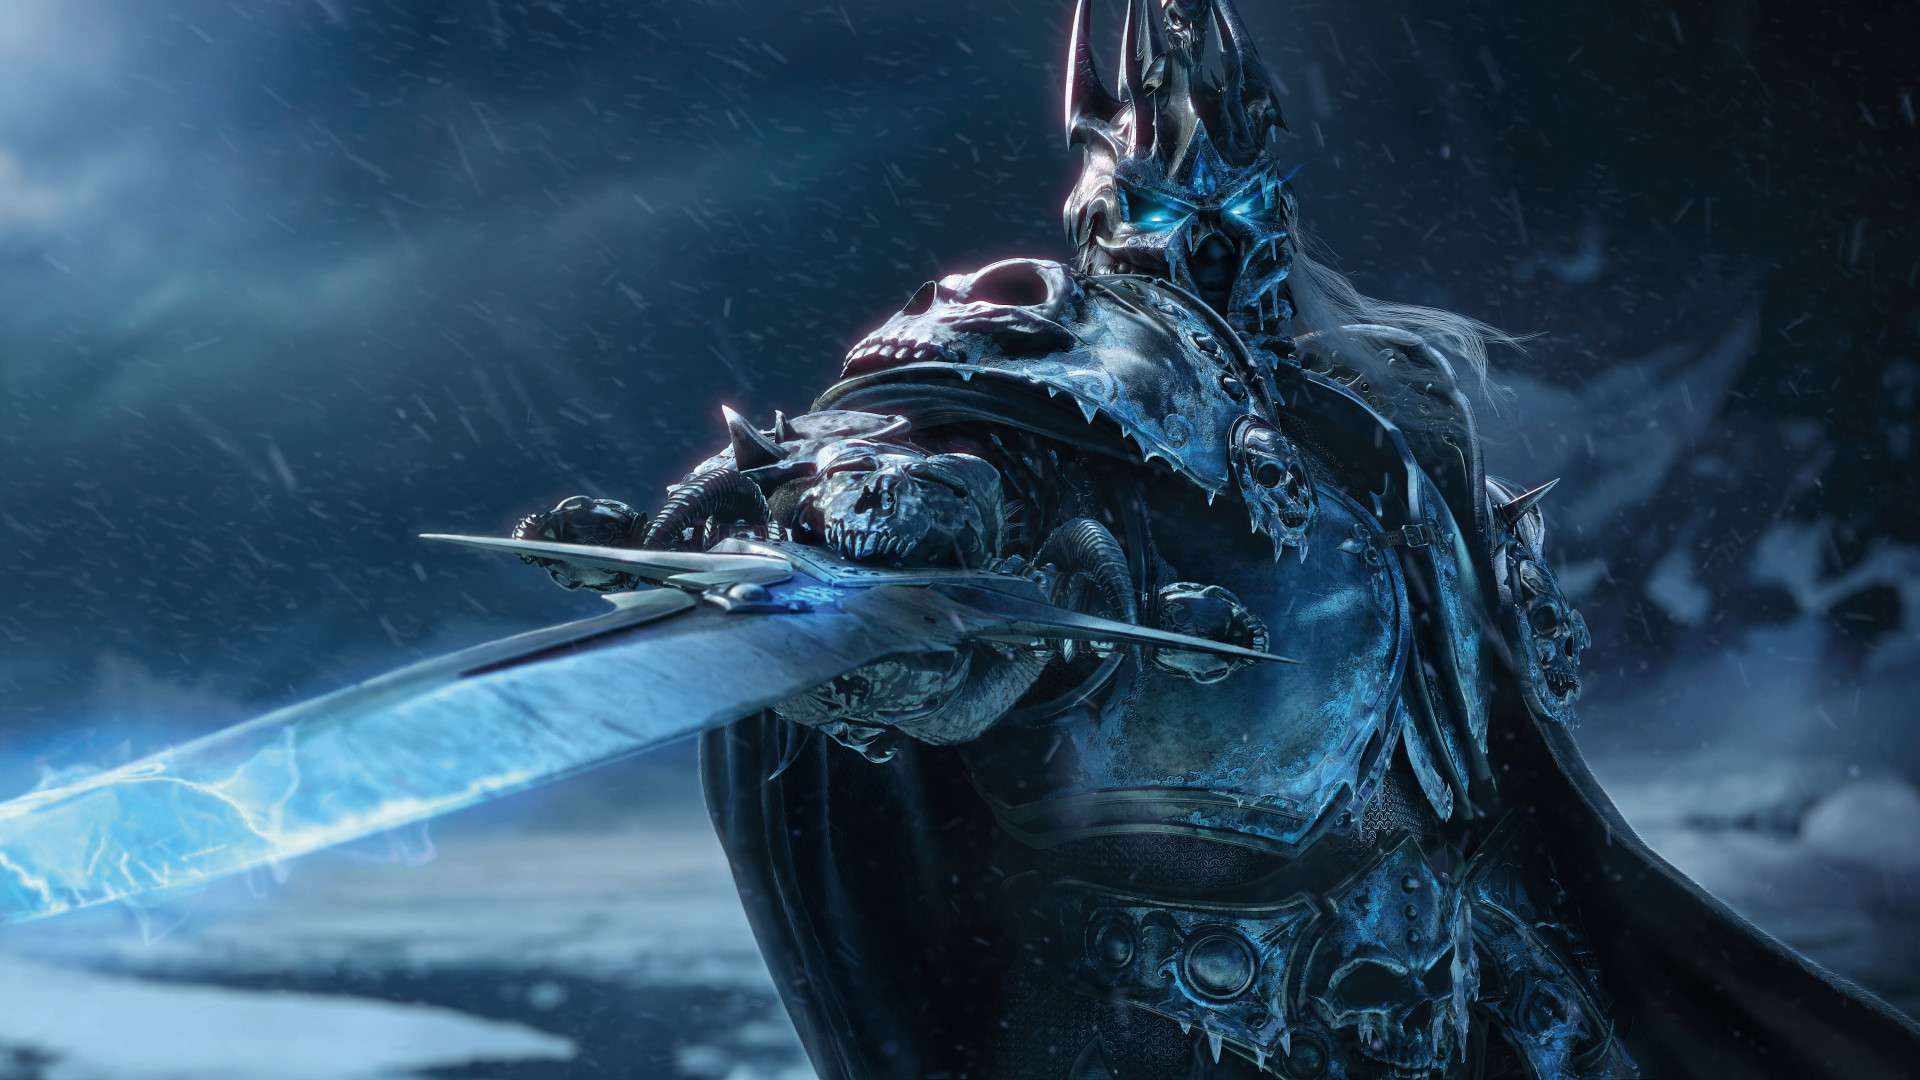  World of Warcraft: Wrath of the Lich King Classic is coming later this year 